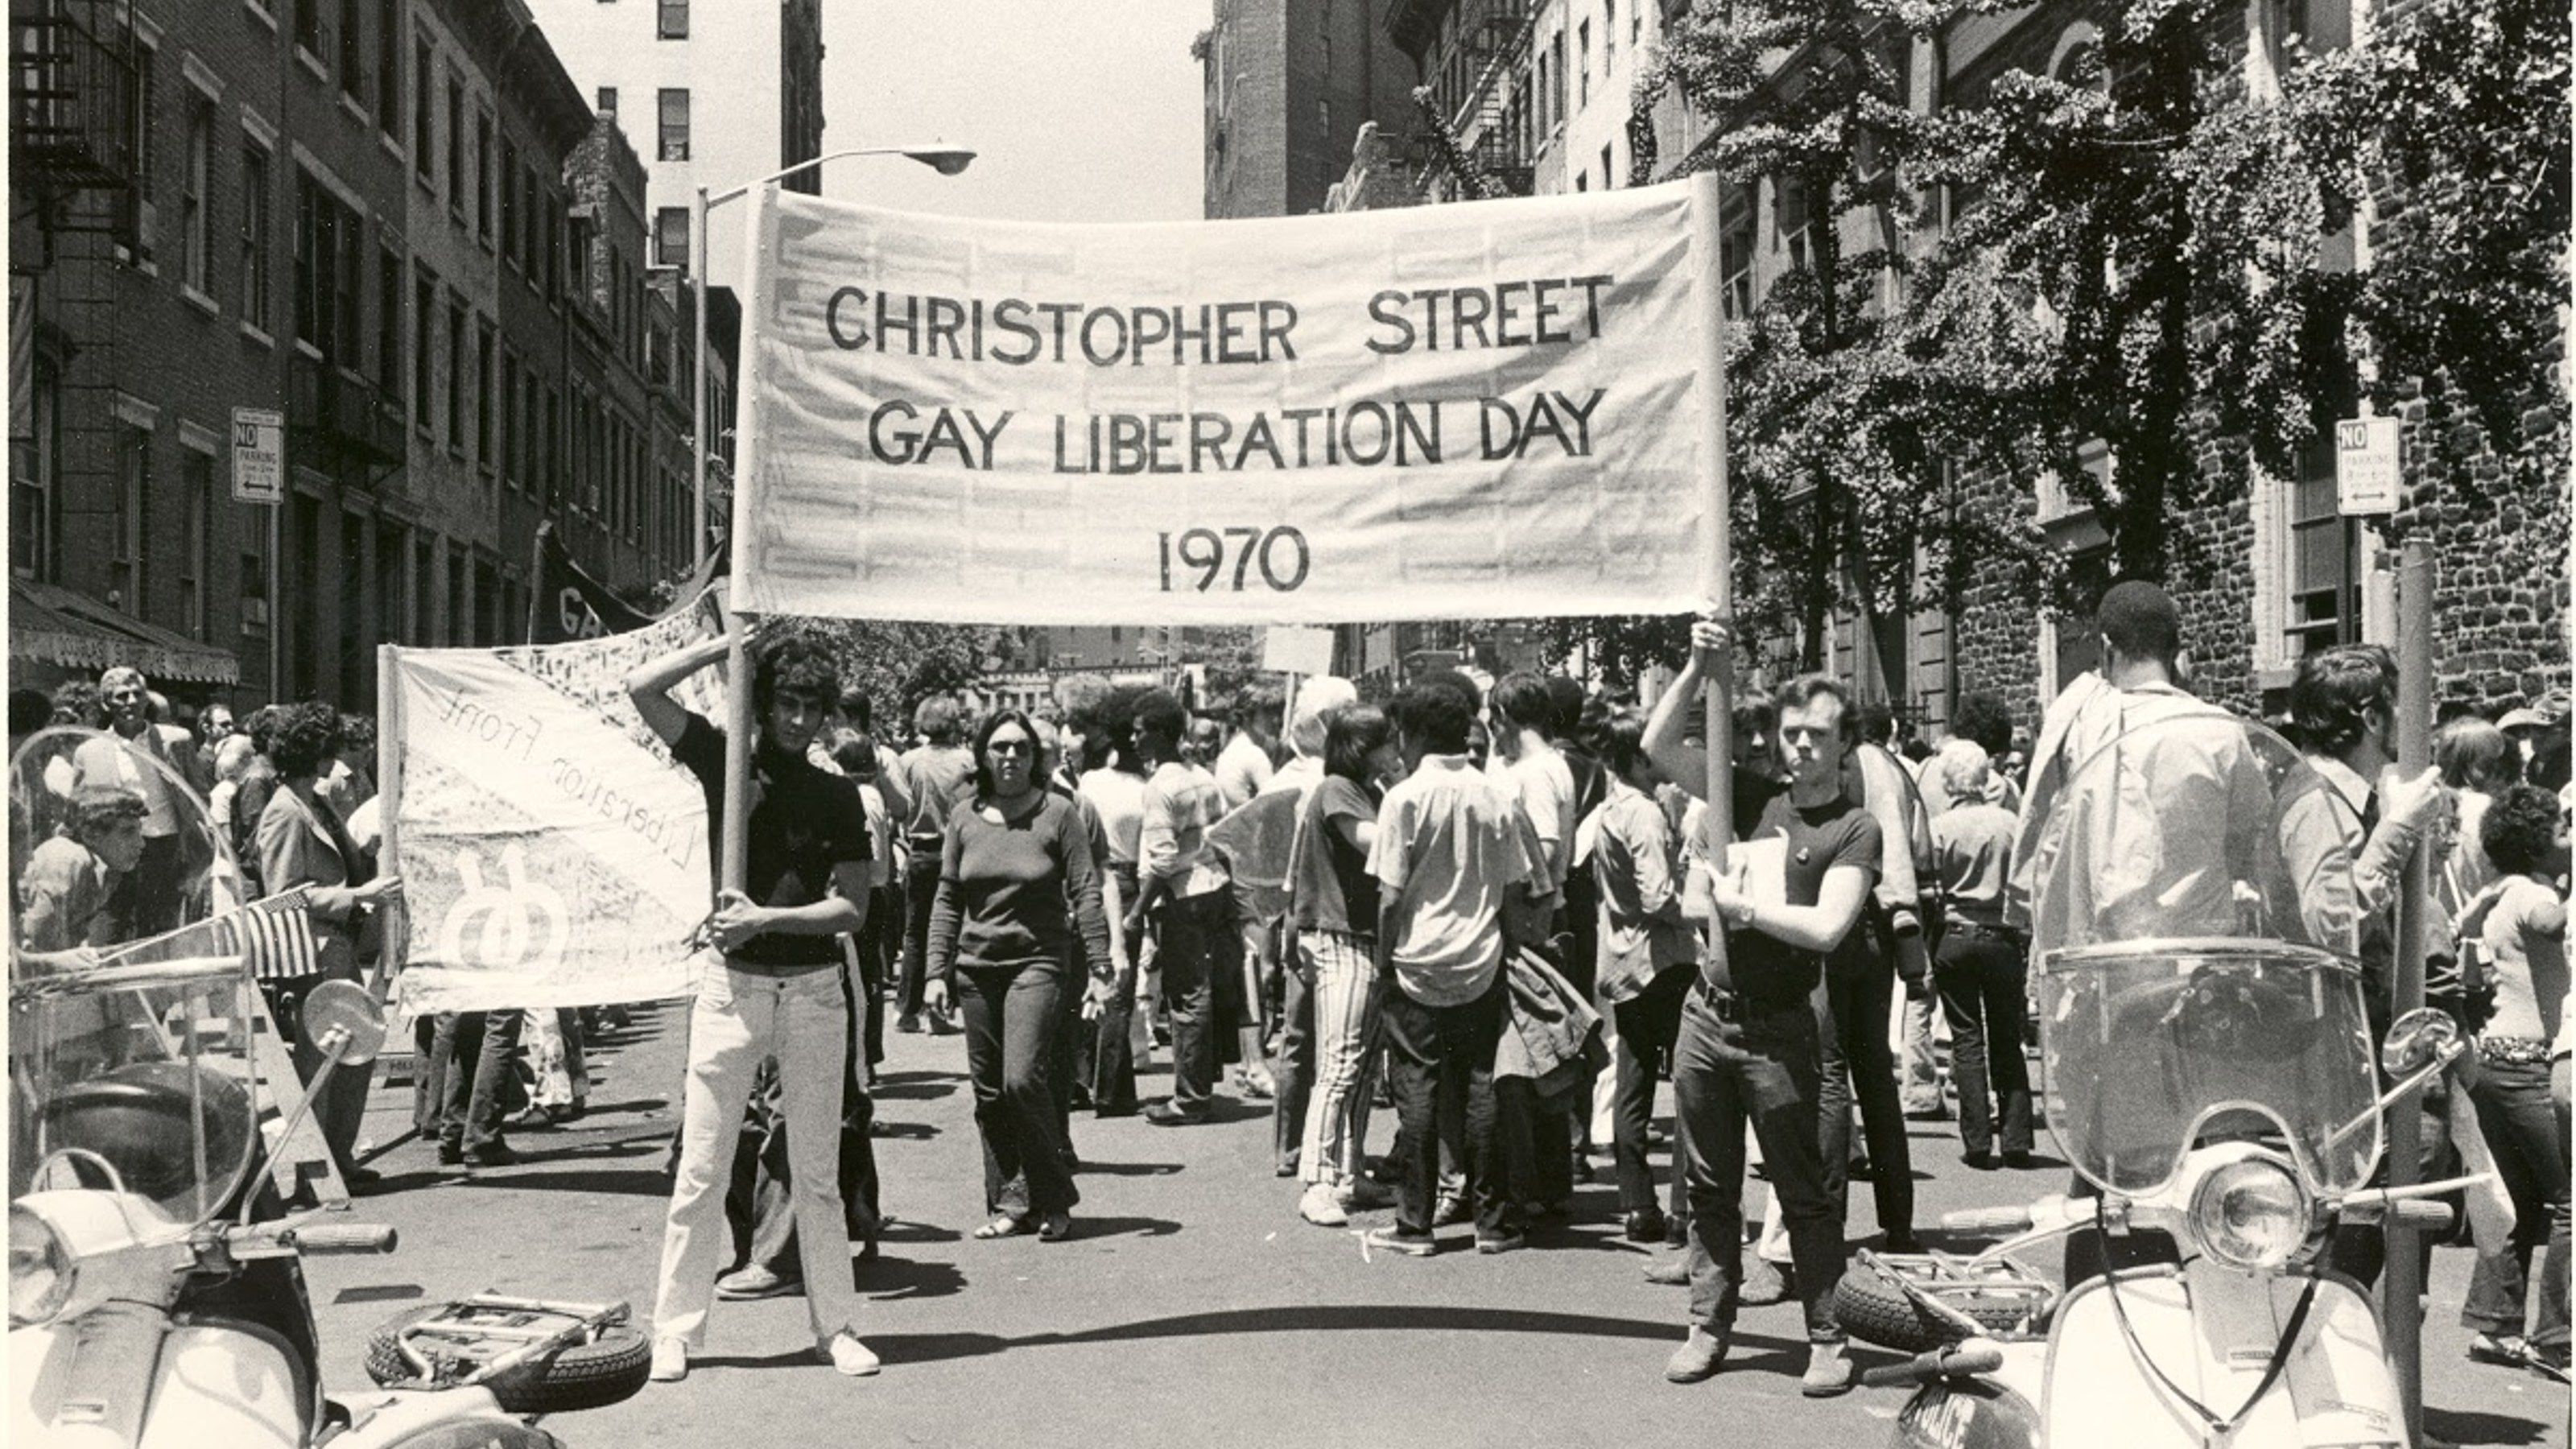 Photo from 1970 depicting the Christopher Street pride march